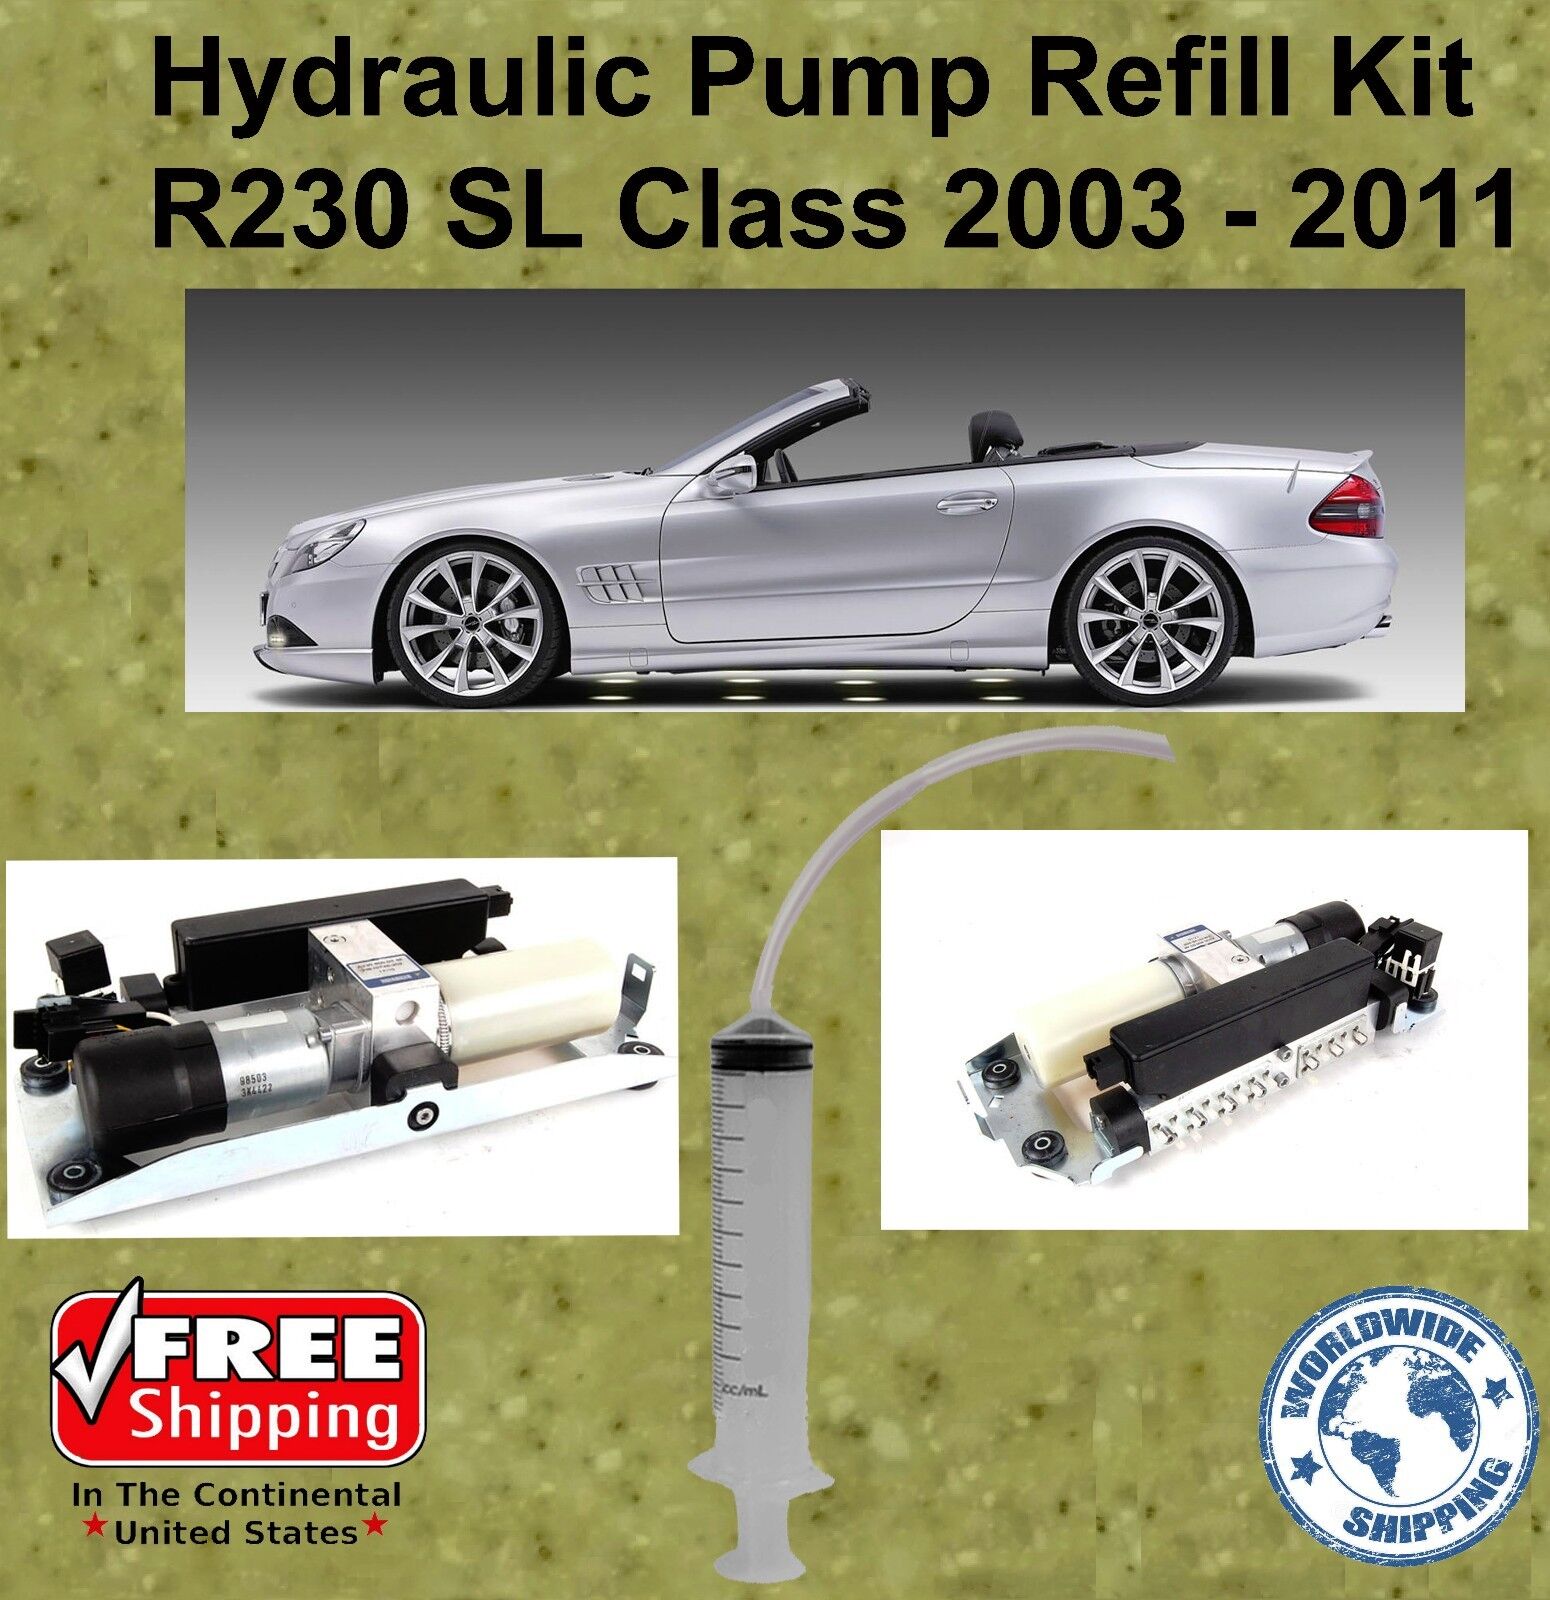 03-11 Mercedes Hydraulic Pump Refill Kit SL Class Convertible R230 With Oil